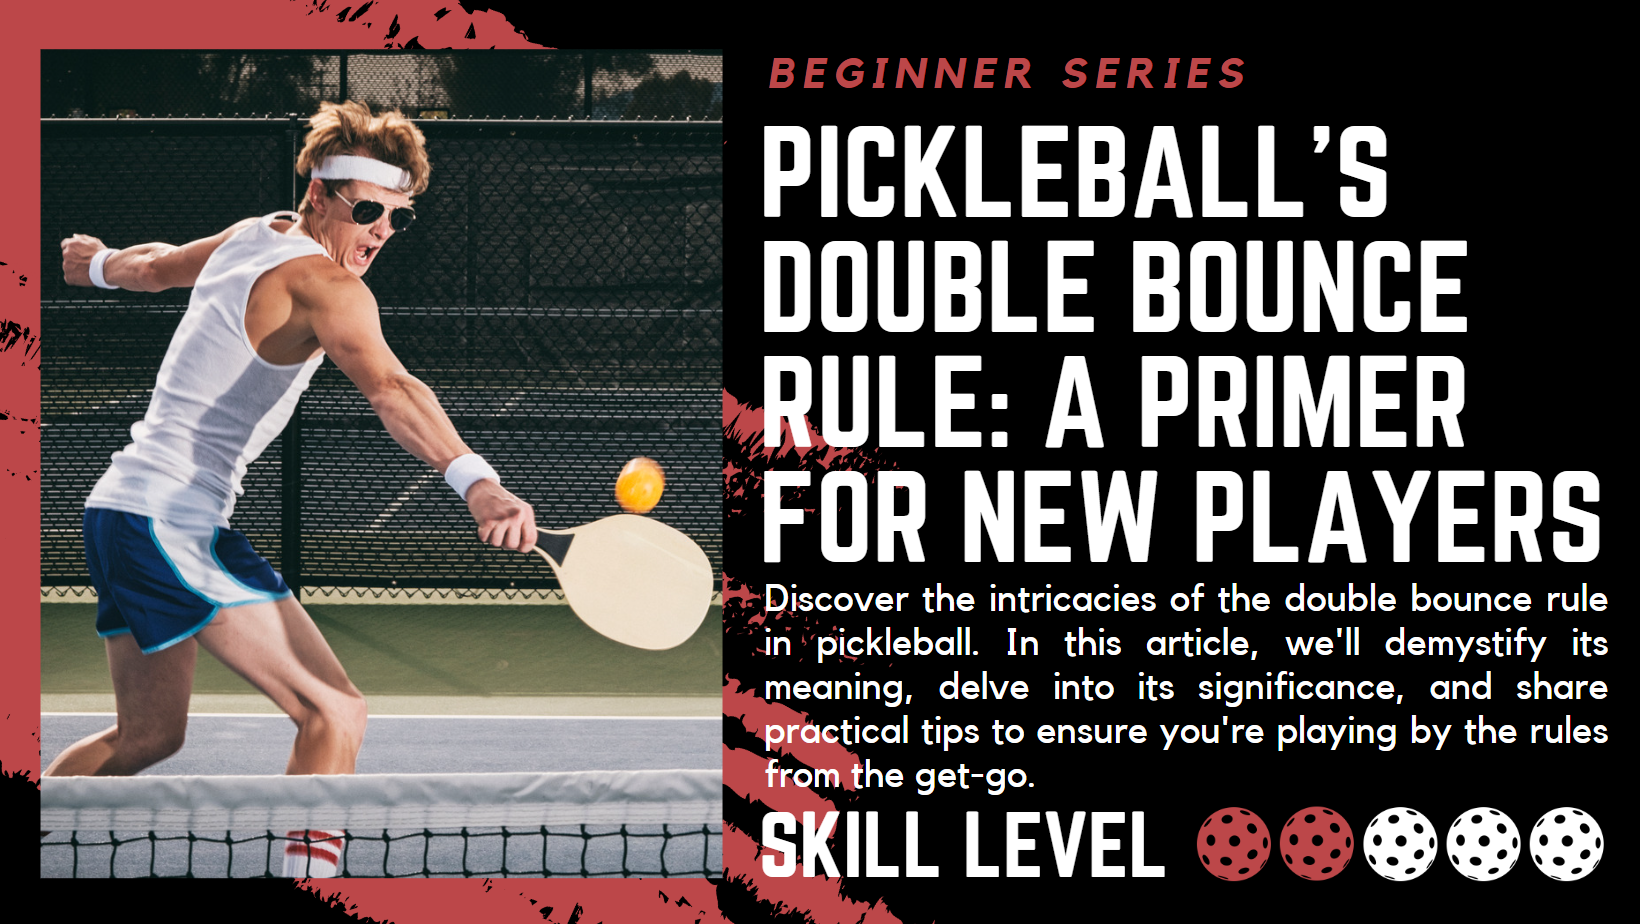 Pickleball’s Double Bounce Rule: A Primer for New Players​. Discover the intricacies of the double bounce rule in pickleball. In this article, we'll demystify its meaning, delve into its significance, and share practical tips to ensure you're playing by the rules from the get-go.